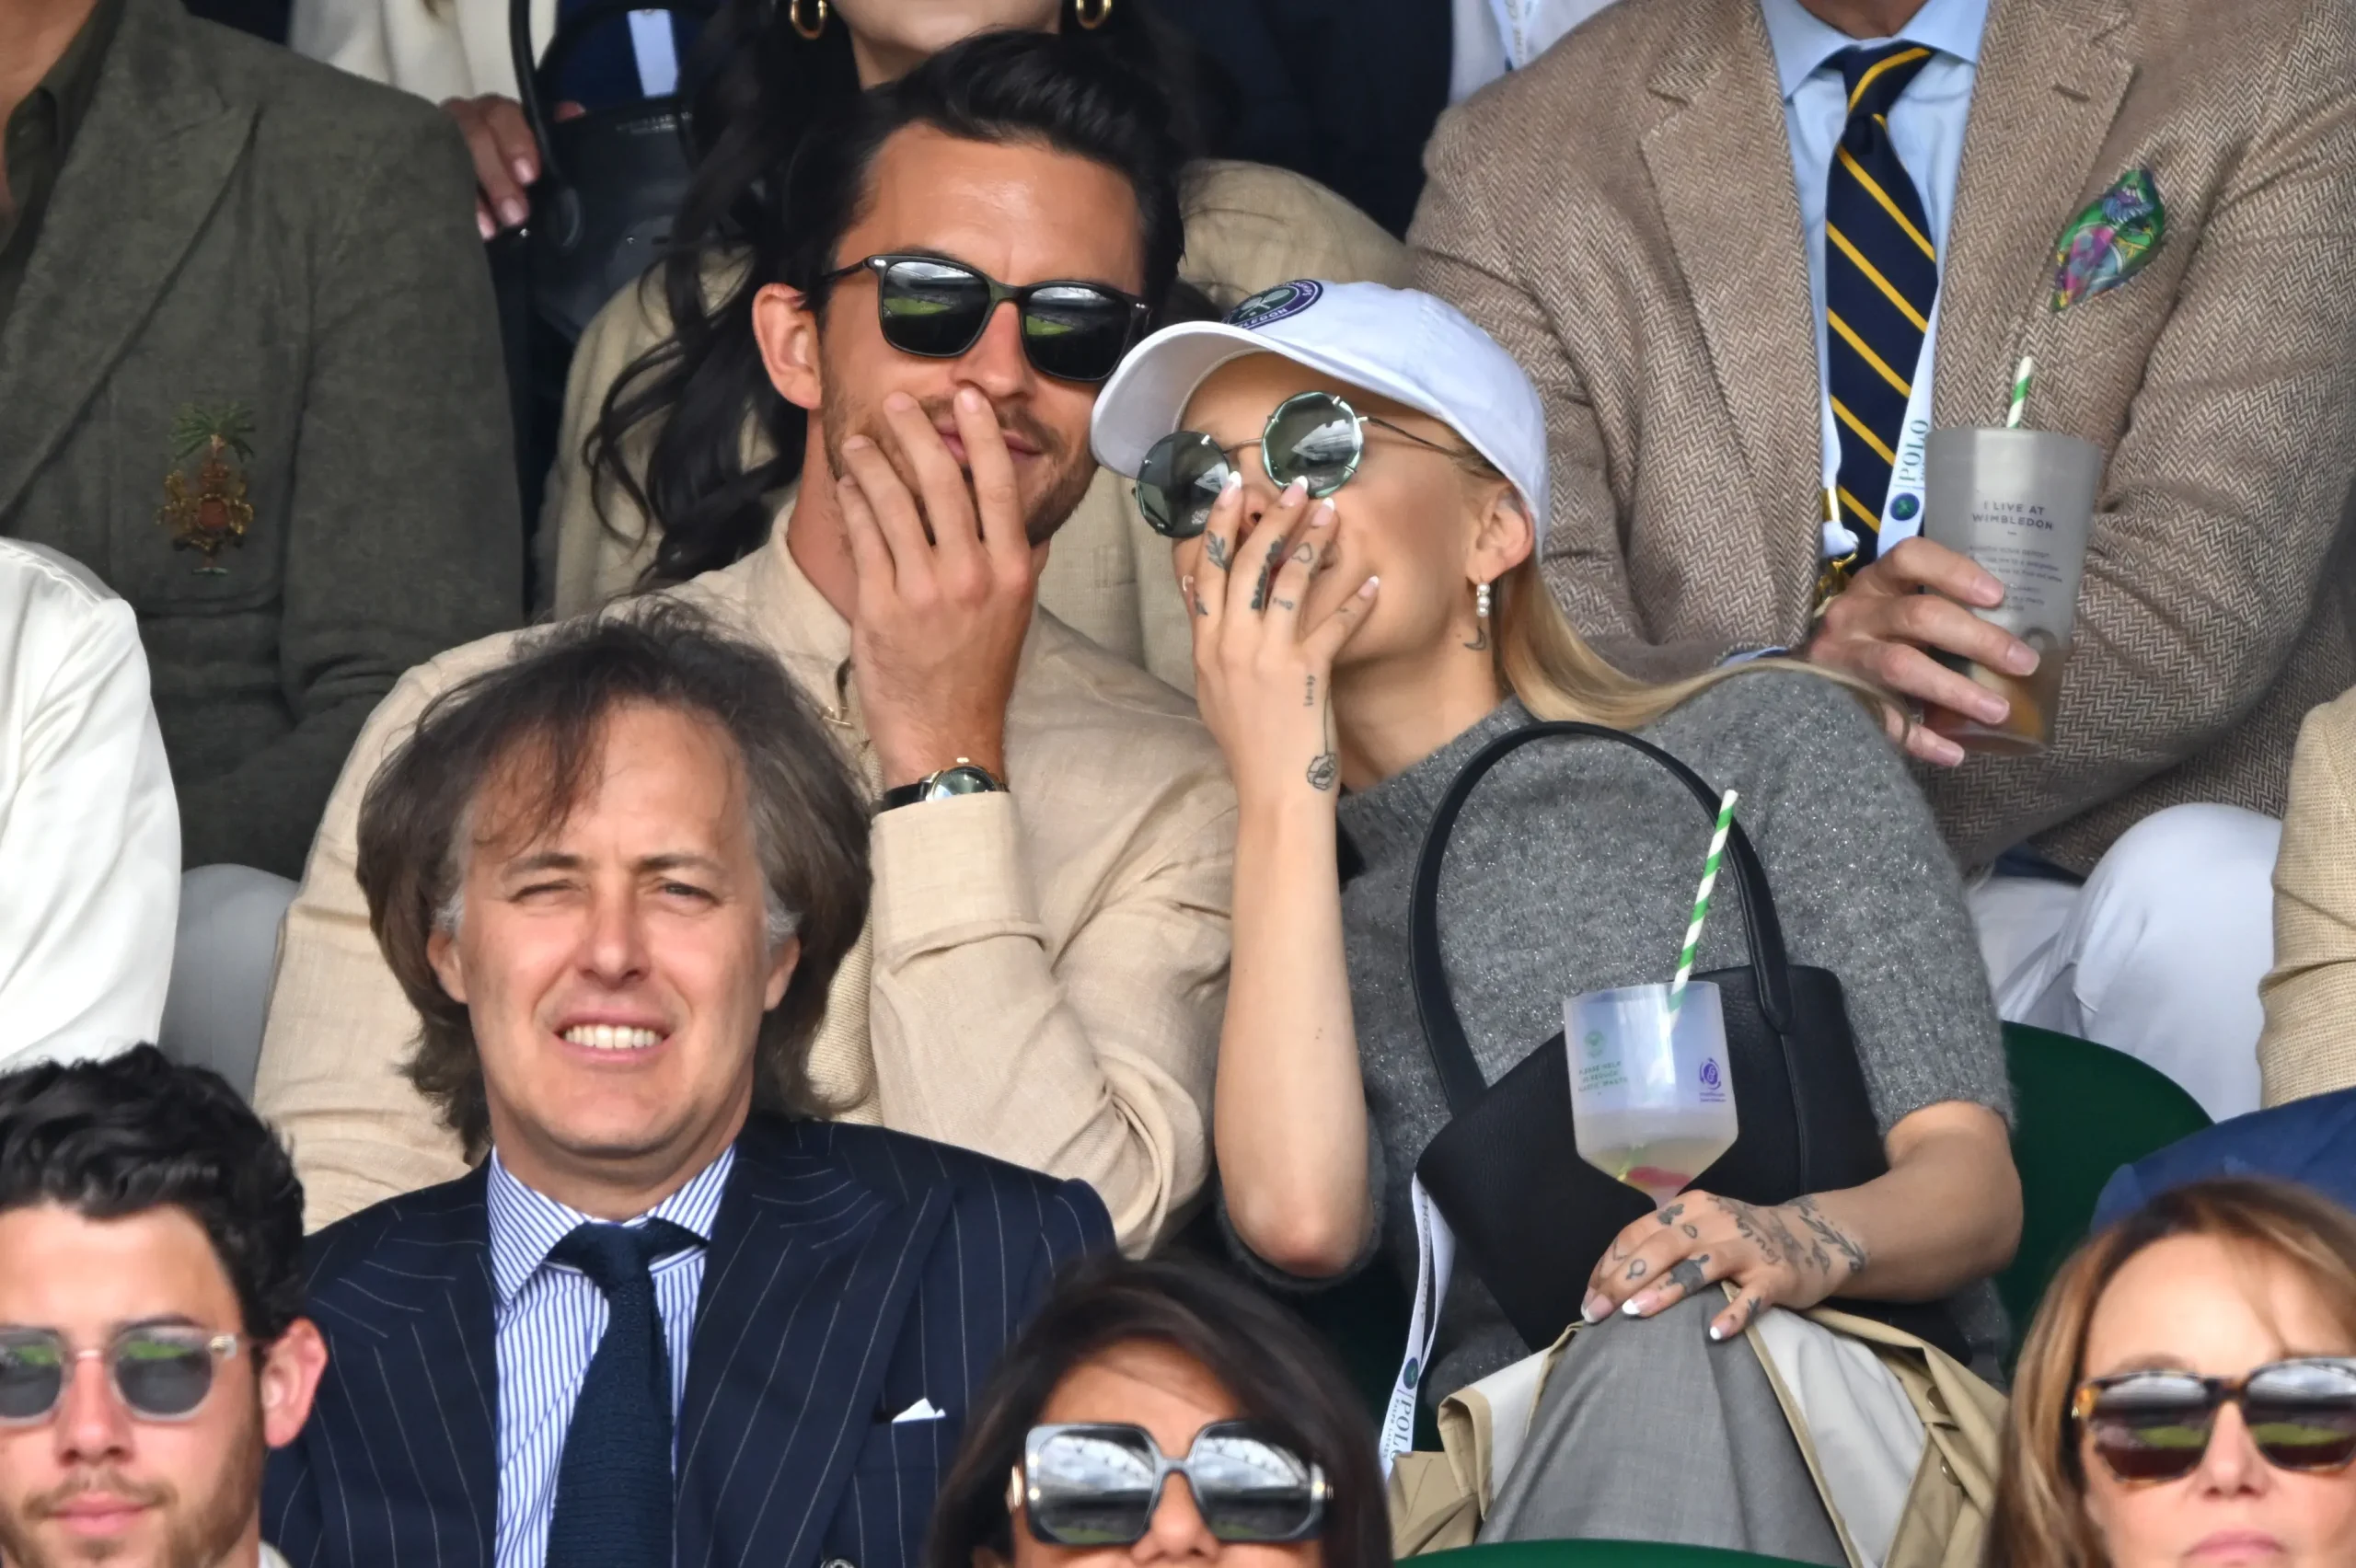 Ariana Grande spotted without wedding ring at Wimbledon, sparks marriage concerns from fans